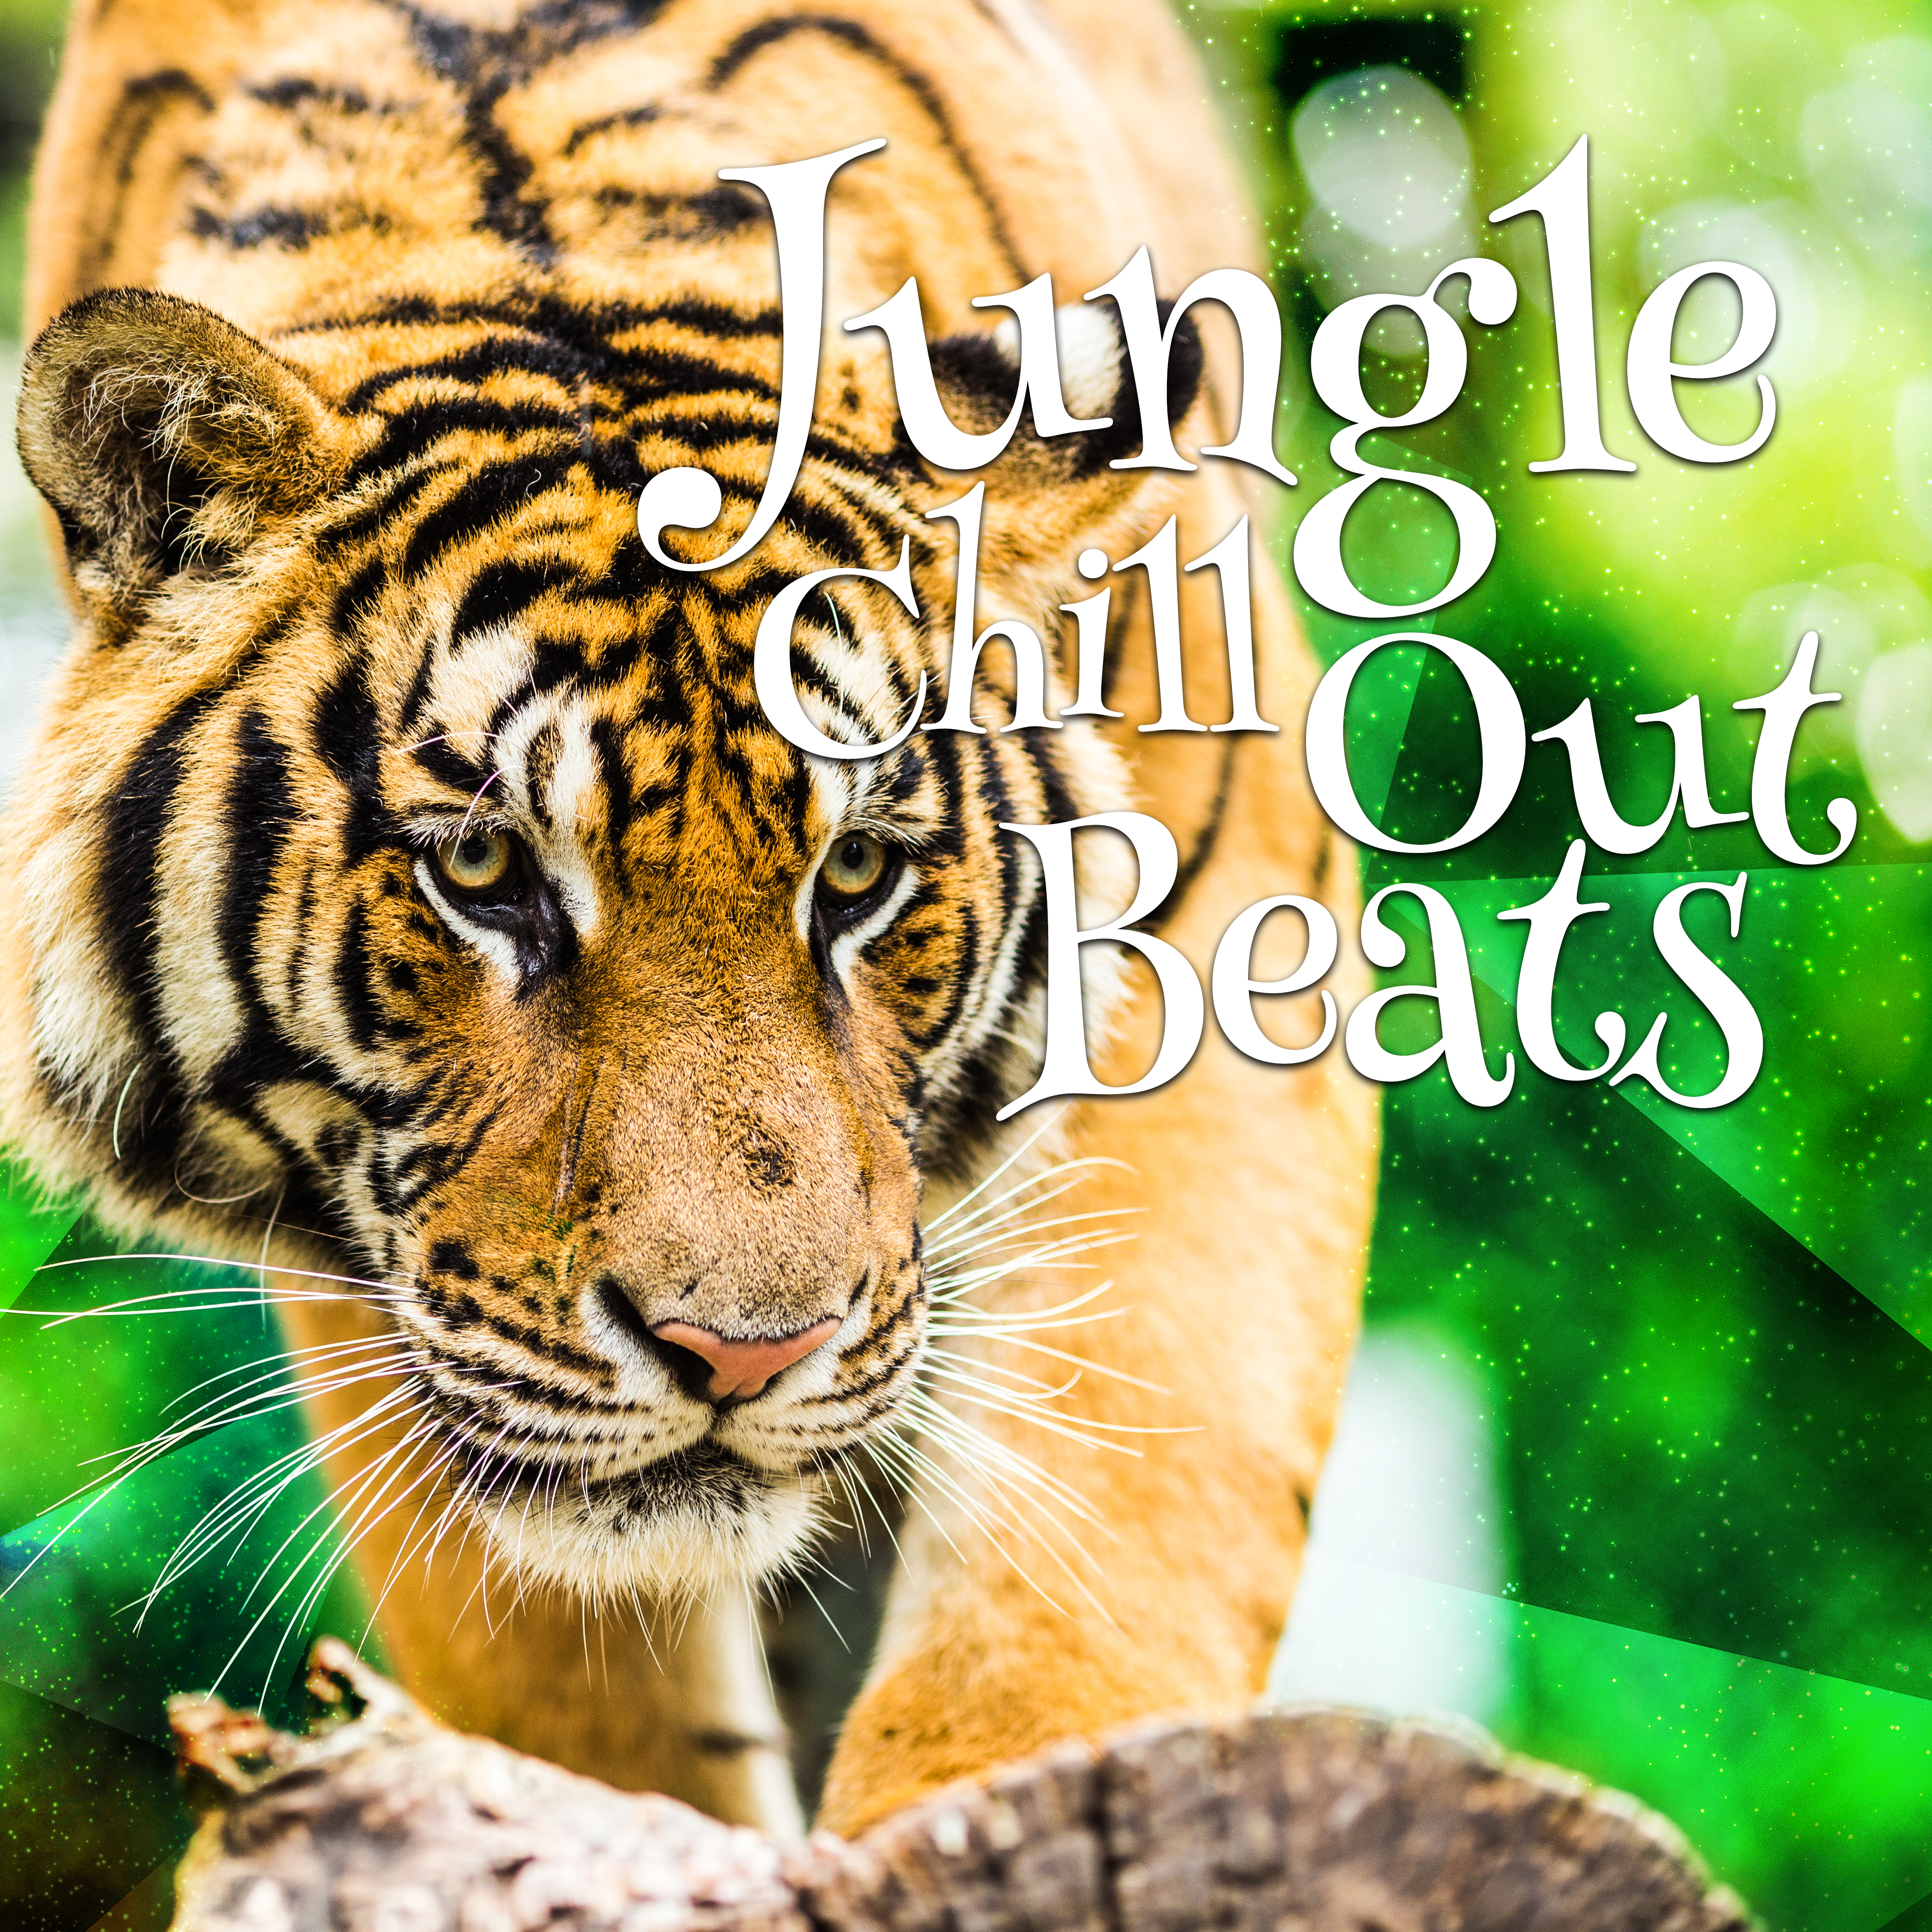 Jungle Chill Out Beats – Summer Melodies, Chill Out Beats, Calm Down & Relax, Peaceful Mind